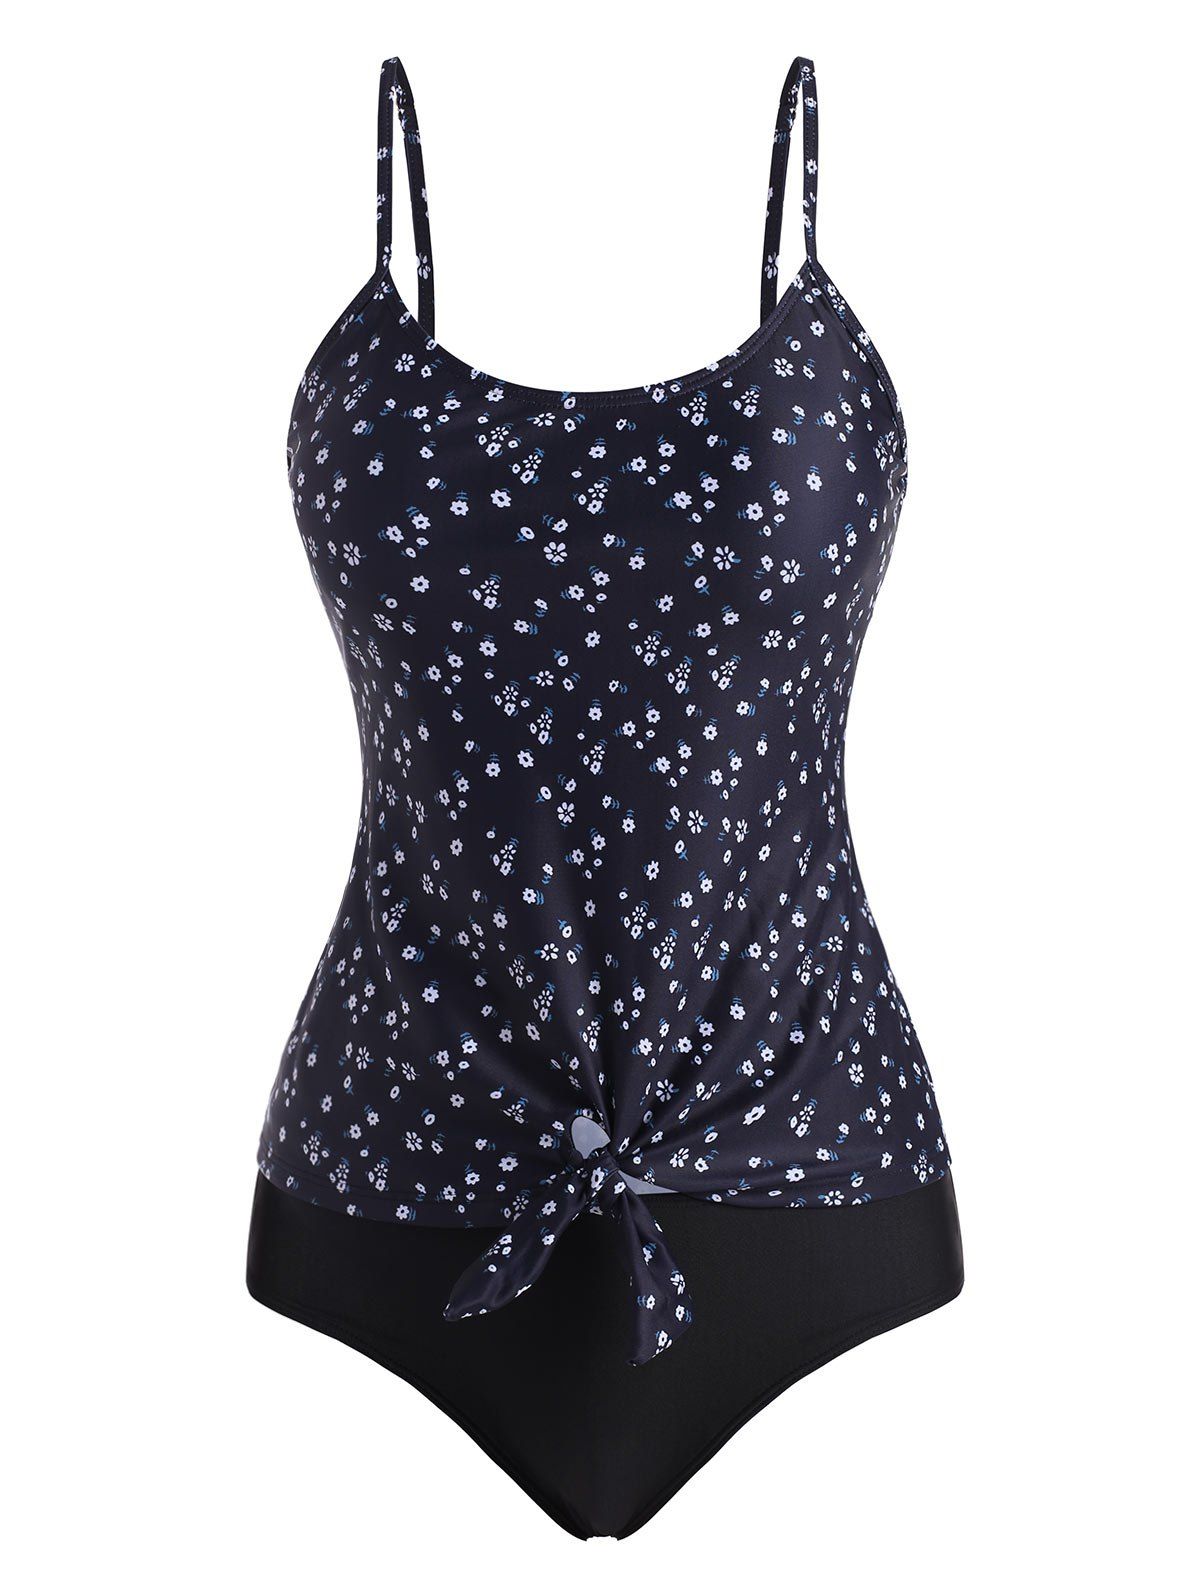 Ditsy Floral Knotted Contrast Tankini Swimwear - BLACK M